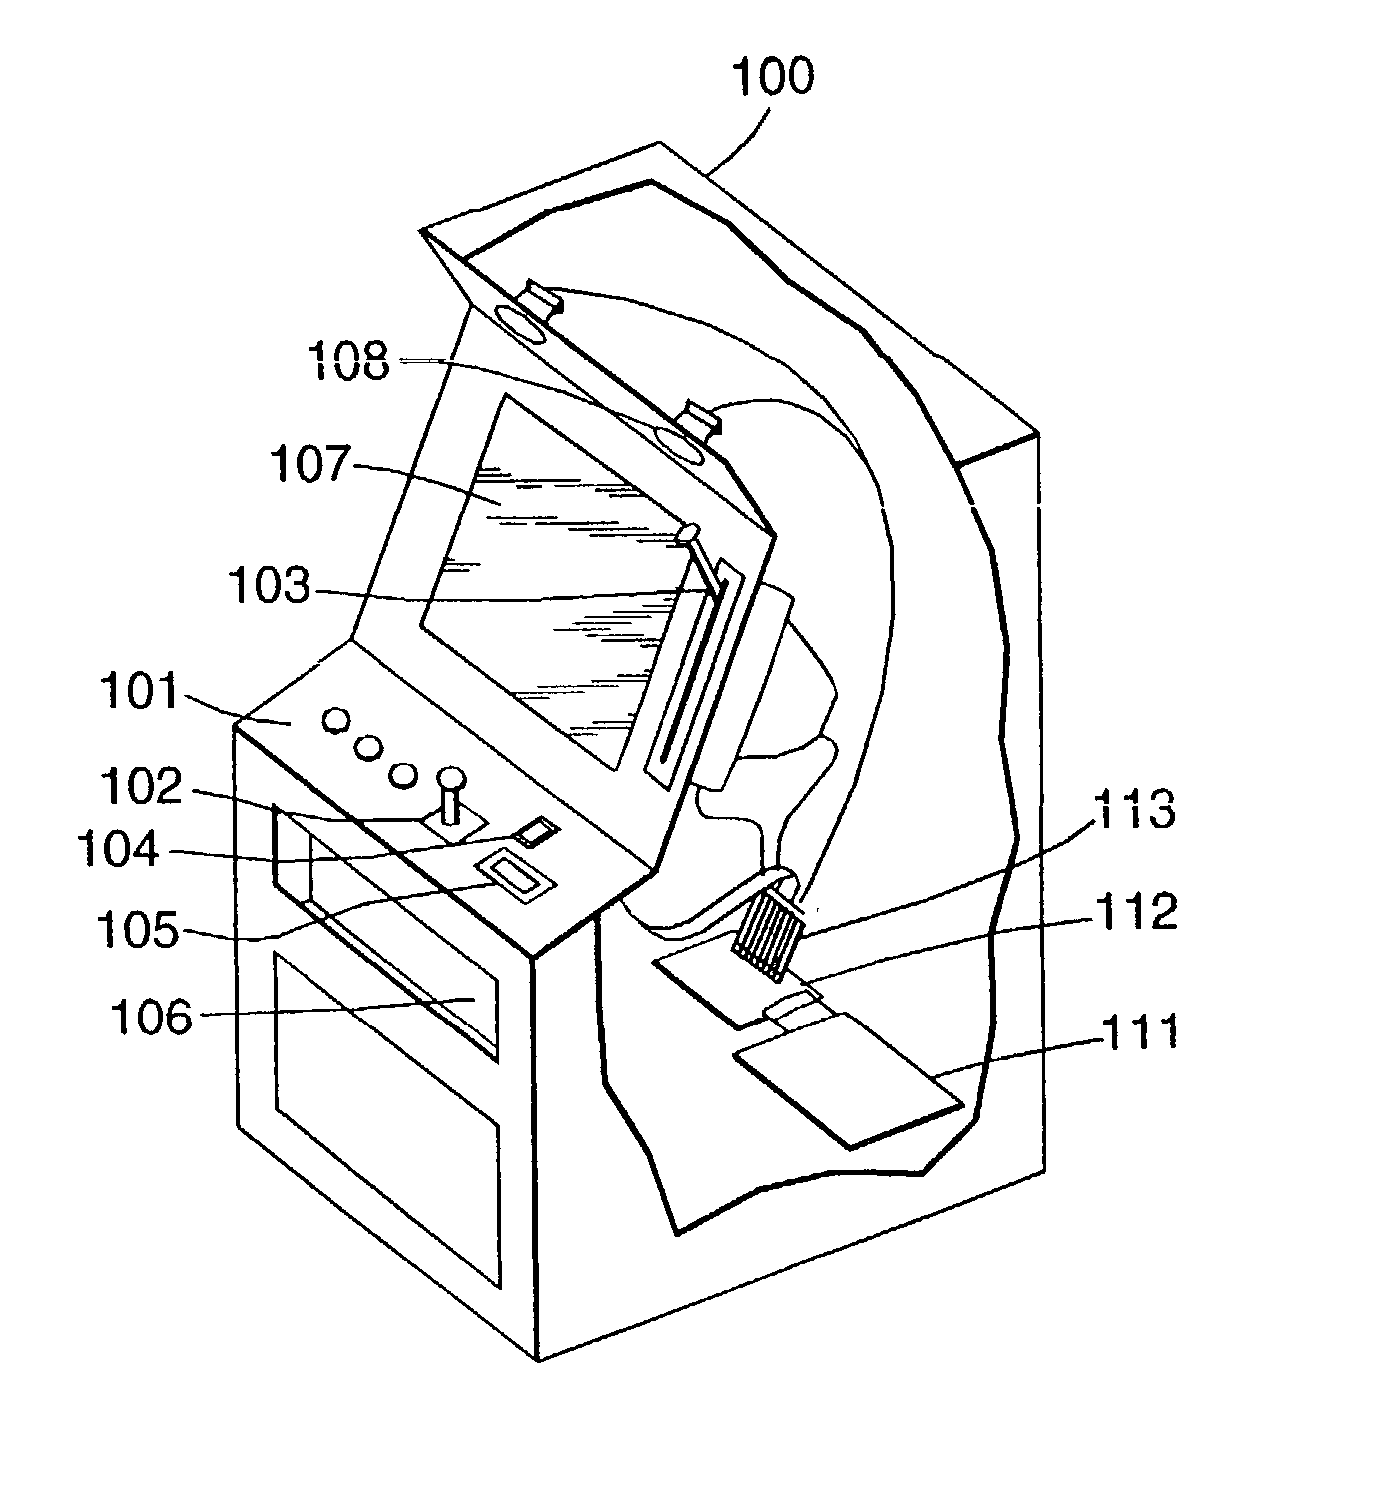 Authentication in a secure computerized gaming system